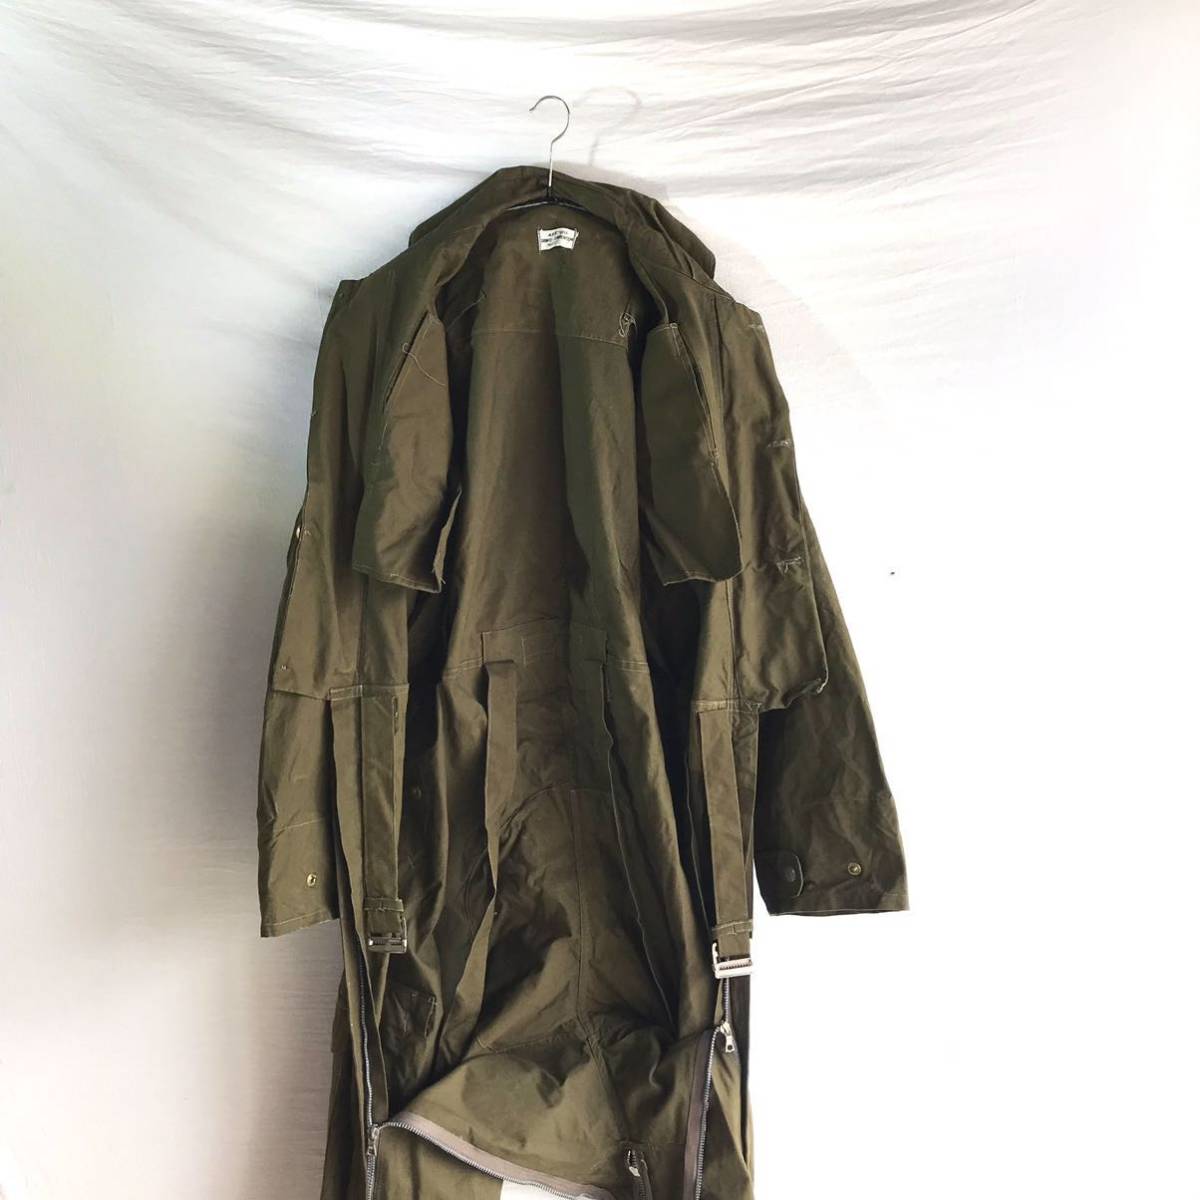  valuable finest quality 50s Belgium army the truth thing tongue car s suit military coverall Vintage tank squad f light cover all 40s ARMY England army 